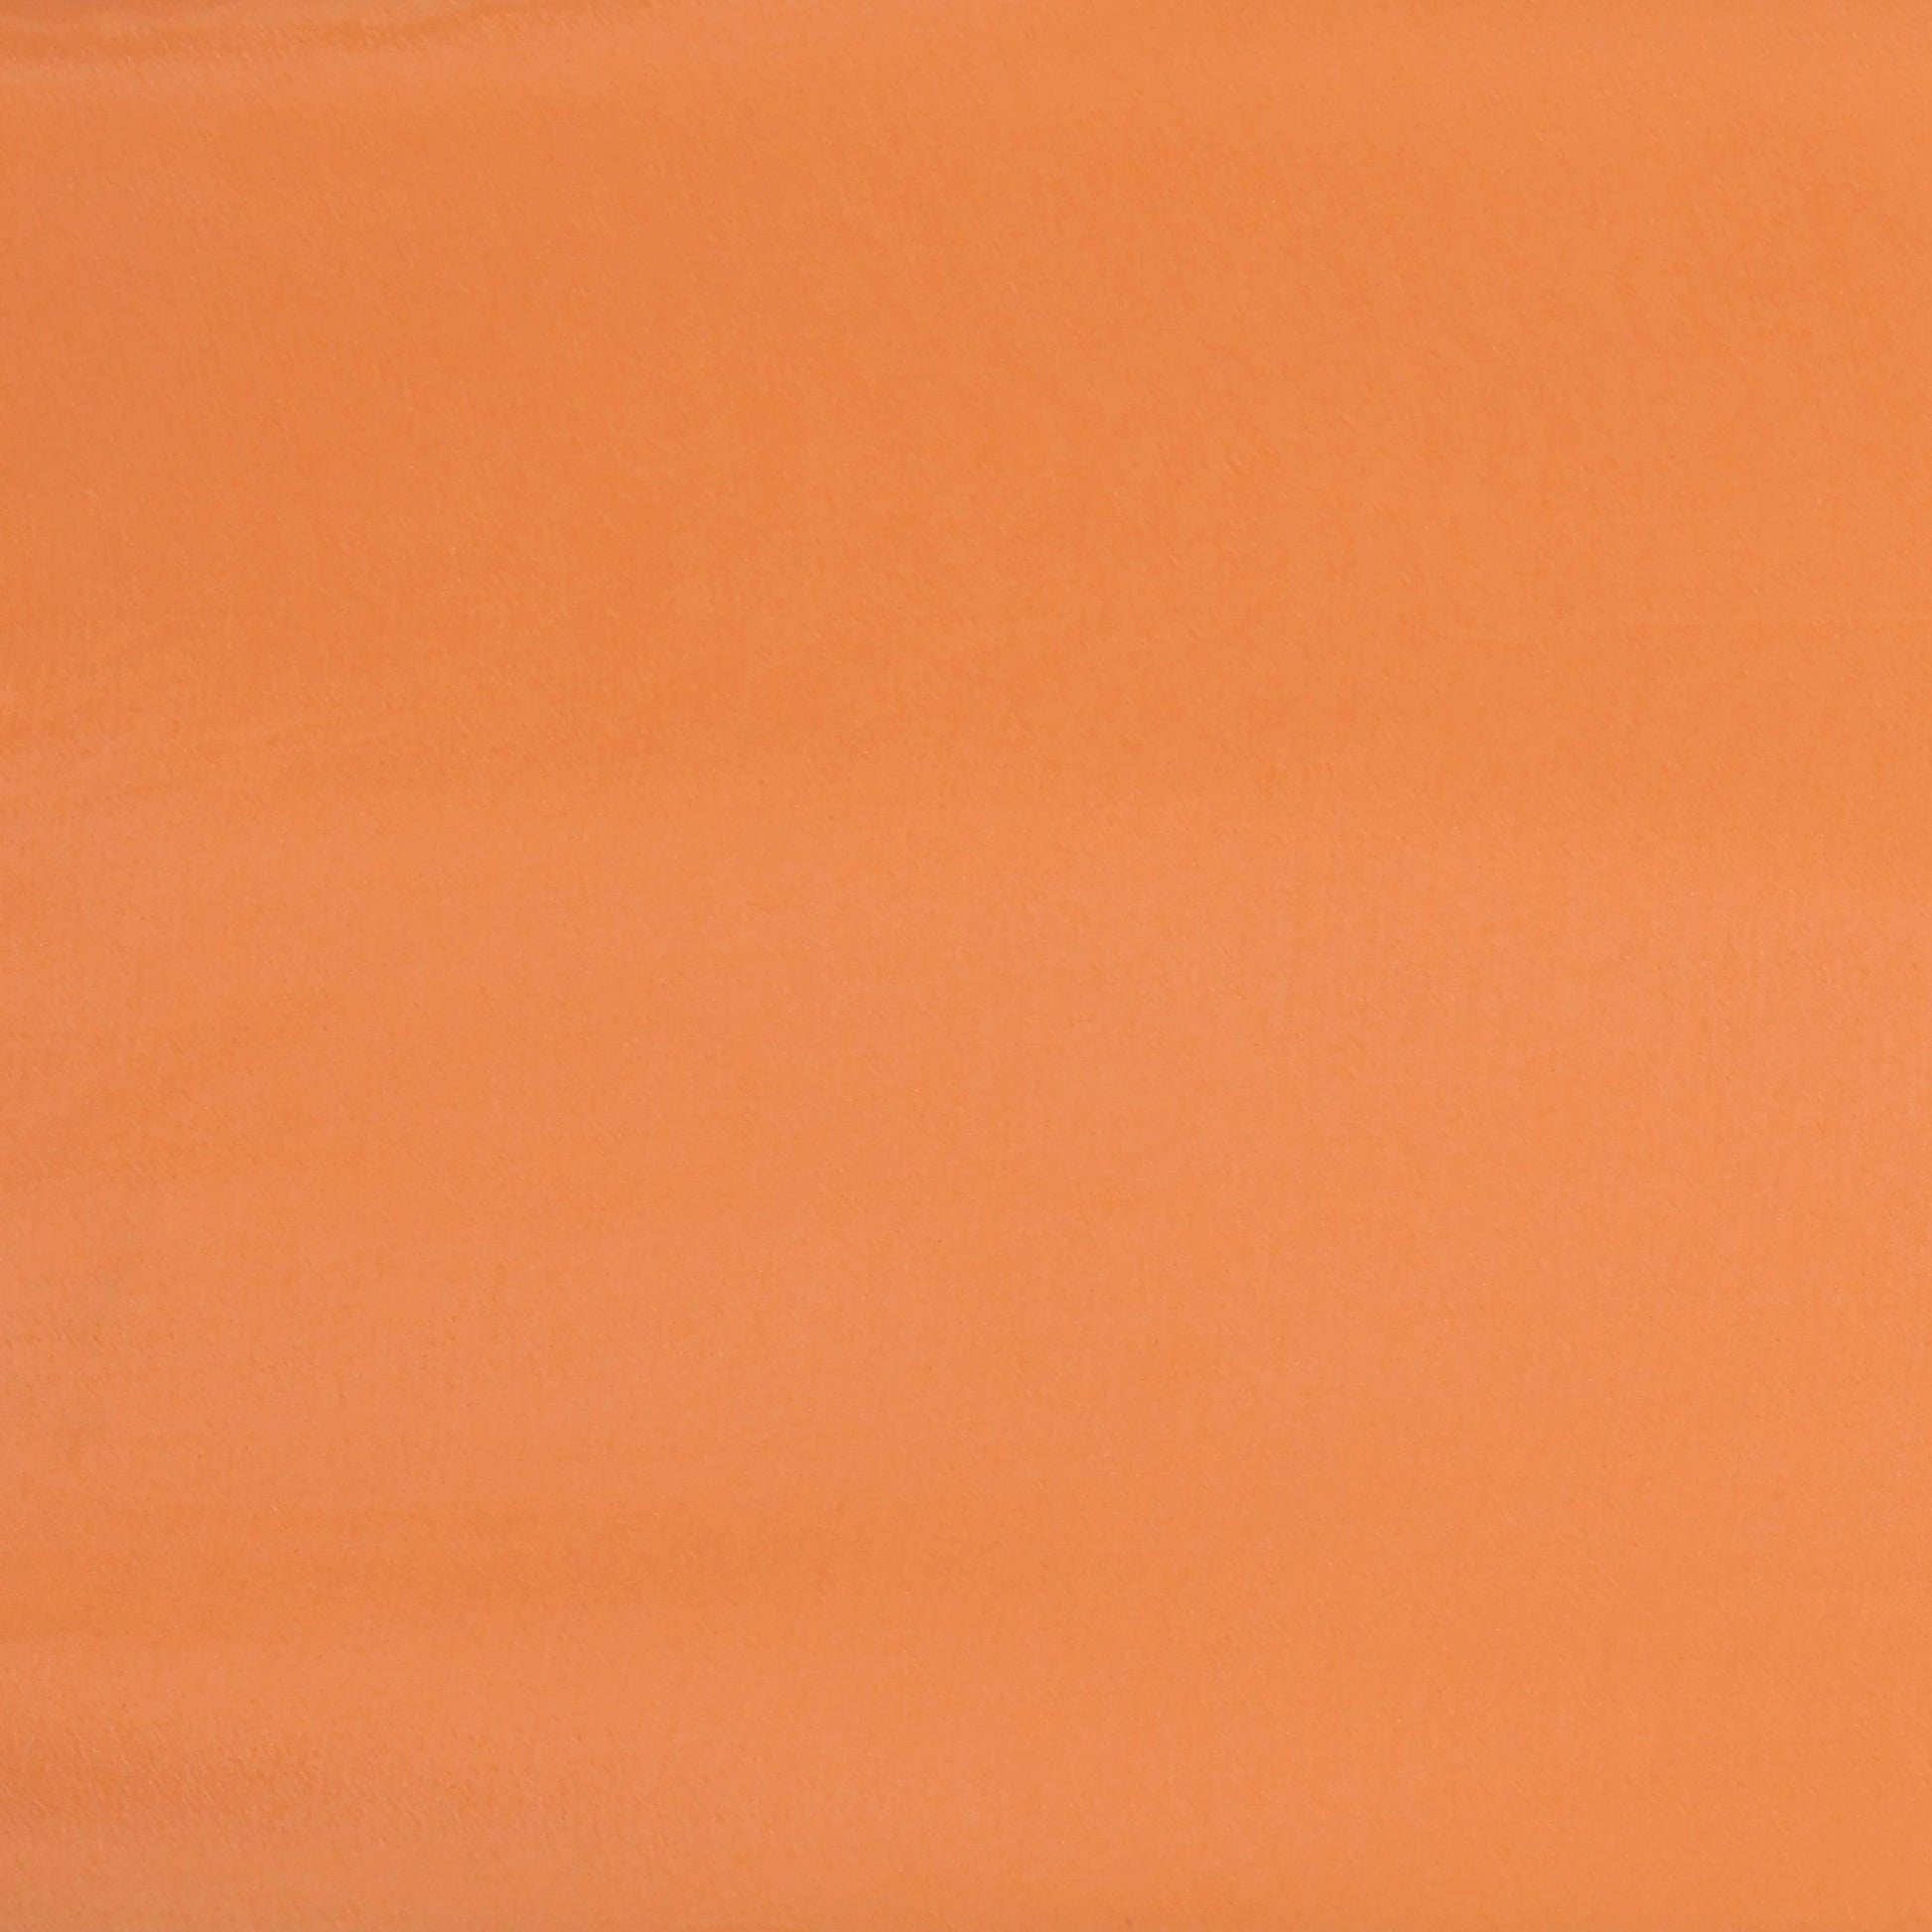 Viscose Chinon Solid Dyed Fabric in Dark Peach Color - FAB VOGUE Studio®